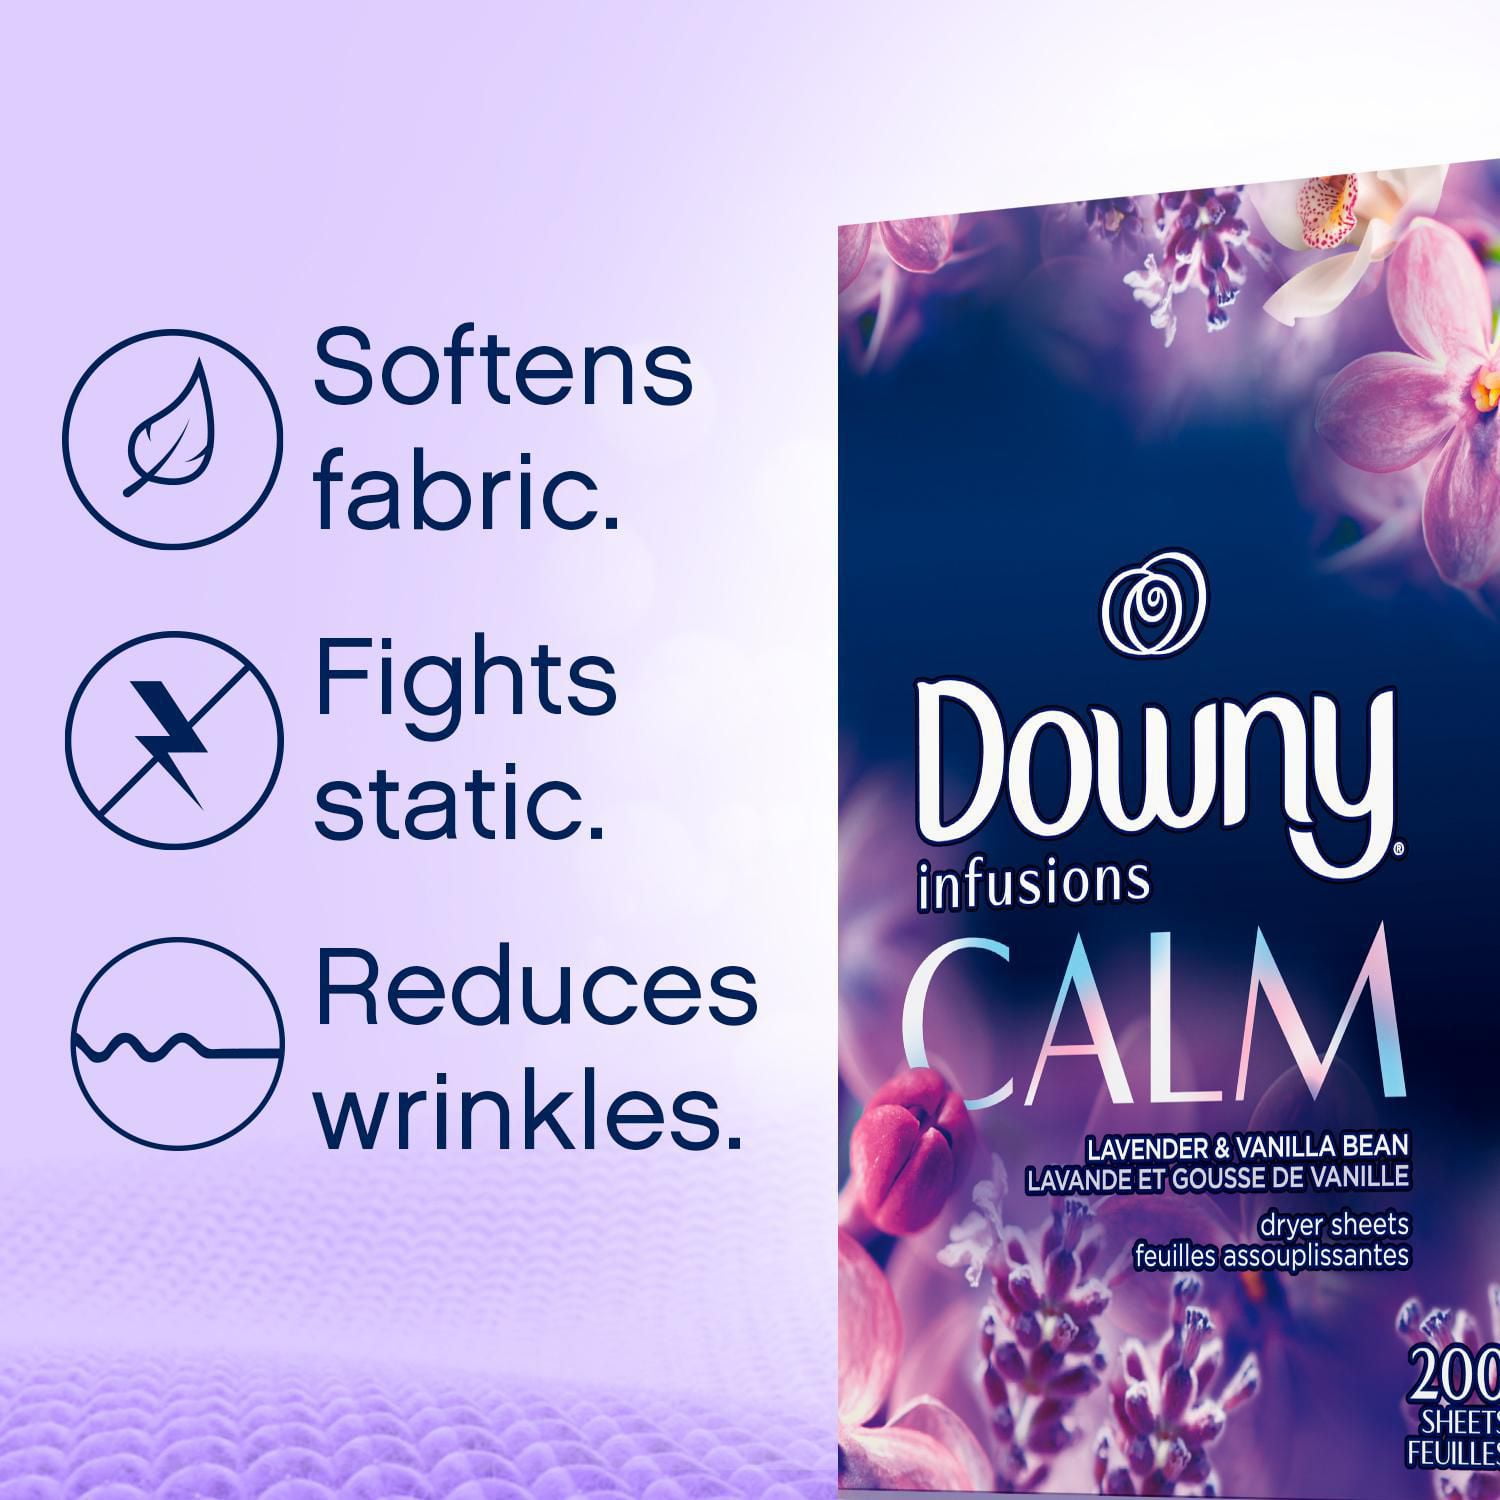  Downy Fabric Softener Dryer Sheets, Cool Cotton, 250